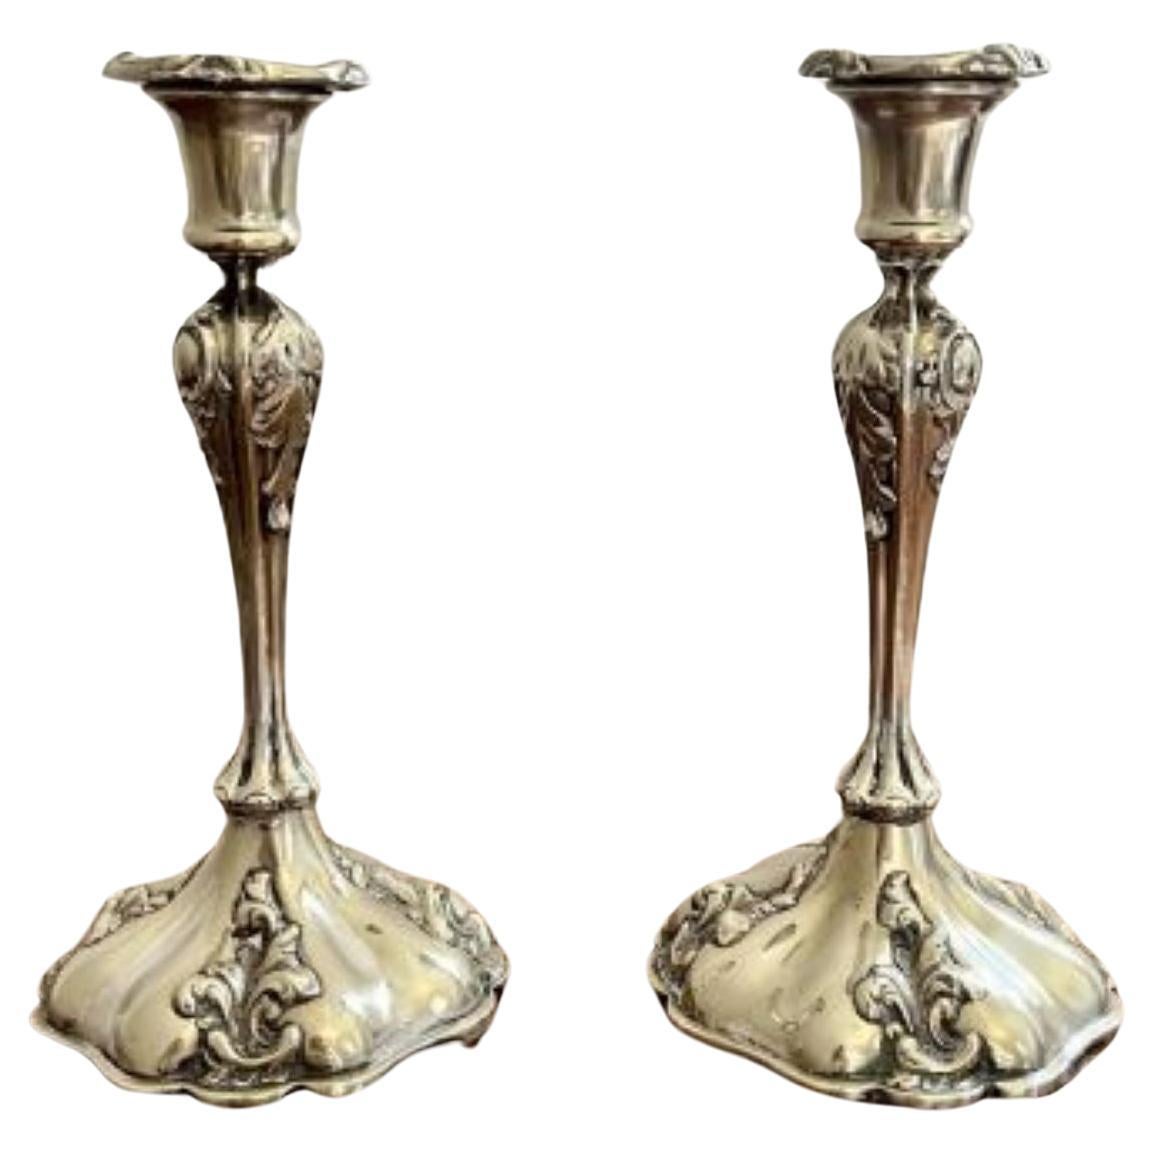 Quality pair of antique silver plated ornate candlesticks  For Sale